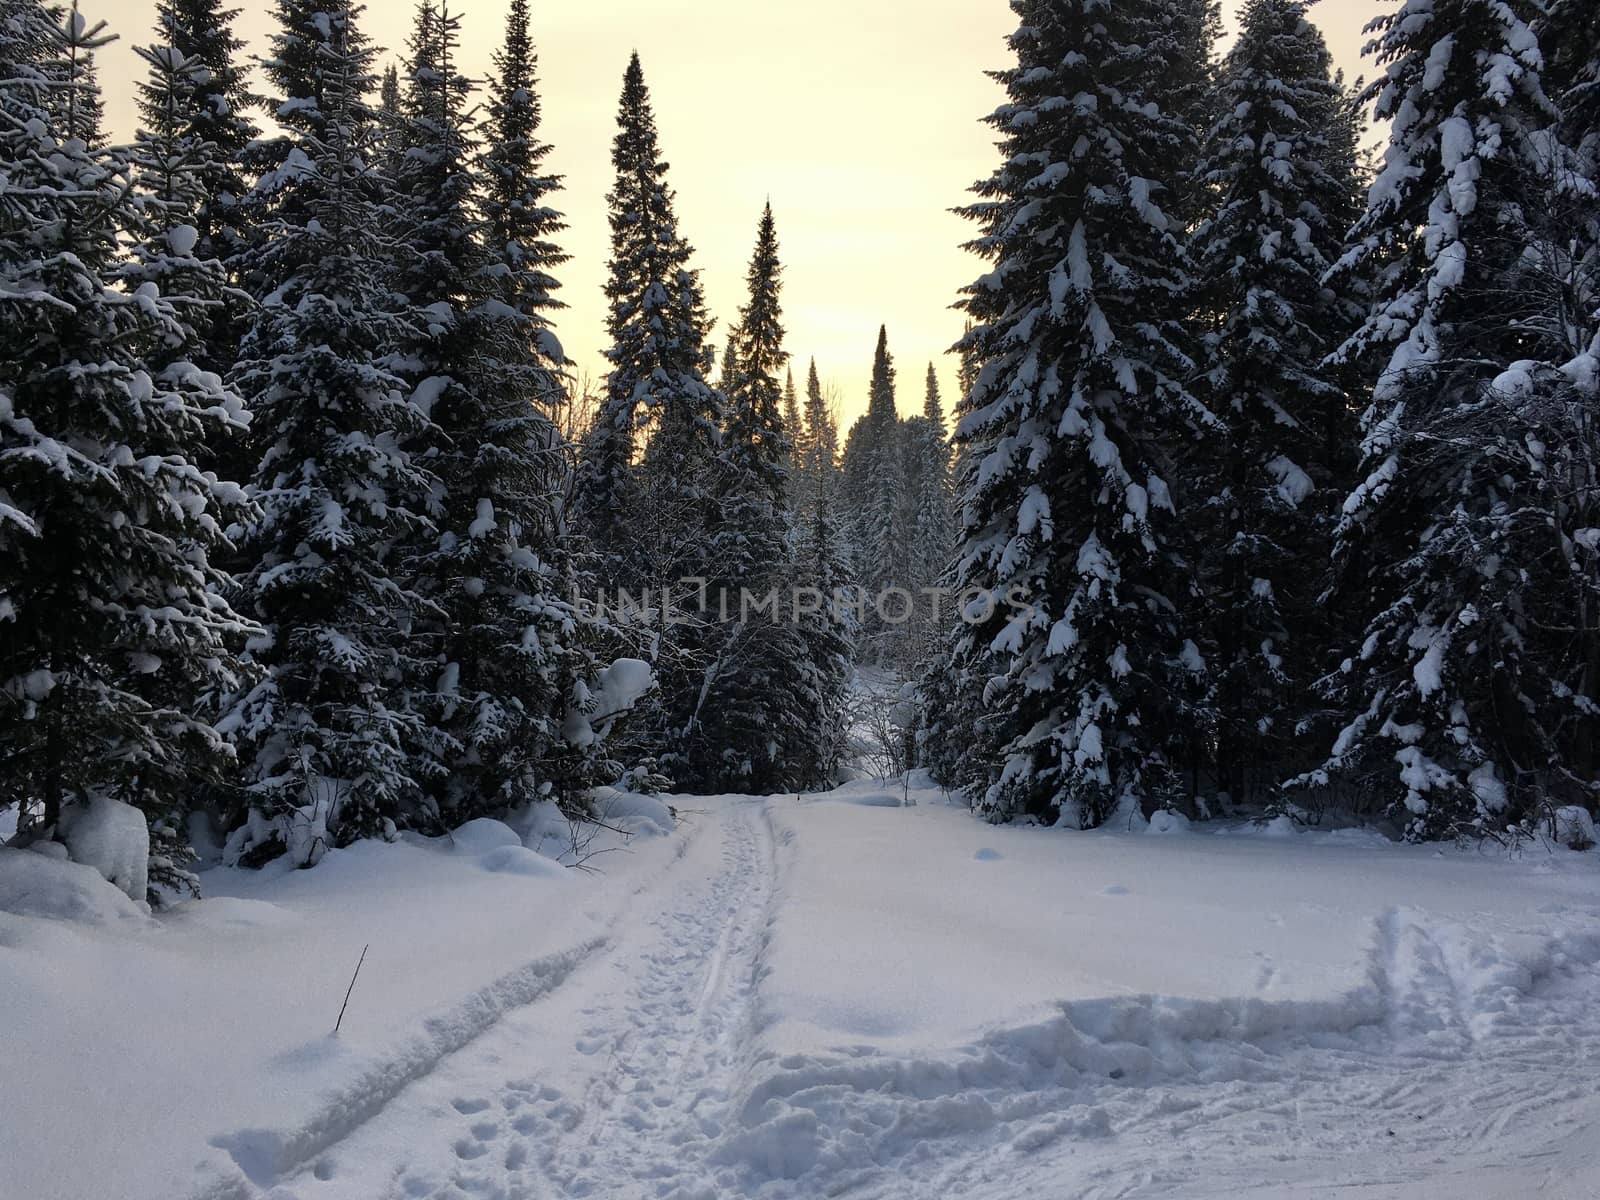 Snowfall in mountain forest with snow covered spruces, fir and birch trees. Snowdrifts on slope of hill. Wintertime landscape - snowy background with space for text. Winter travel and rest concept